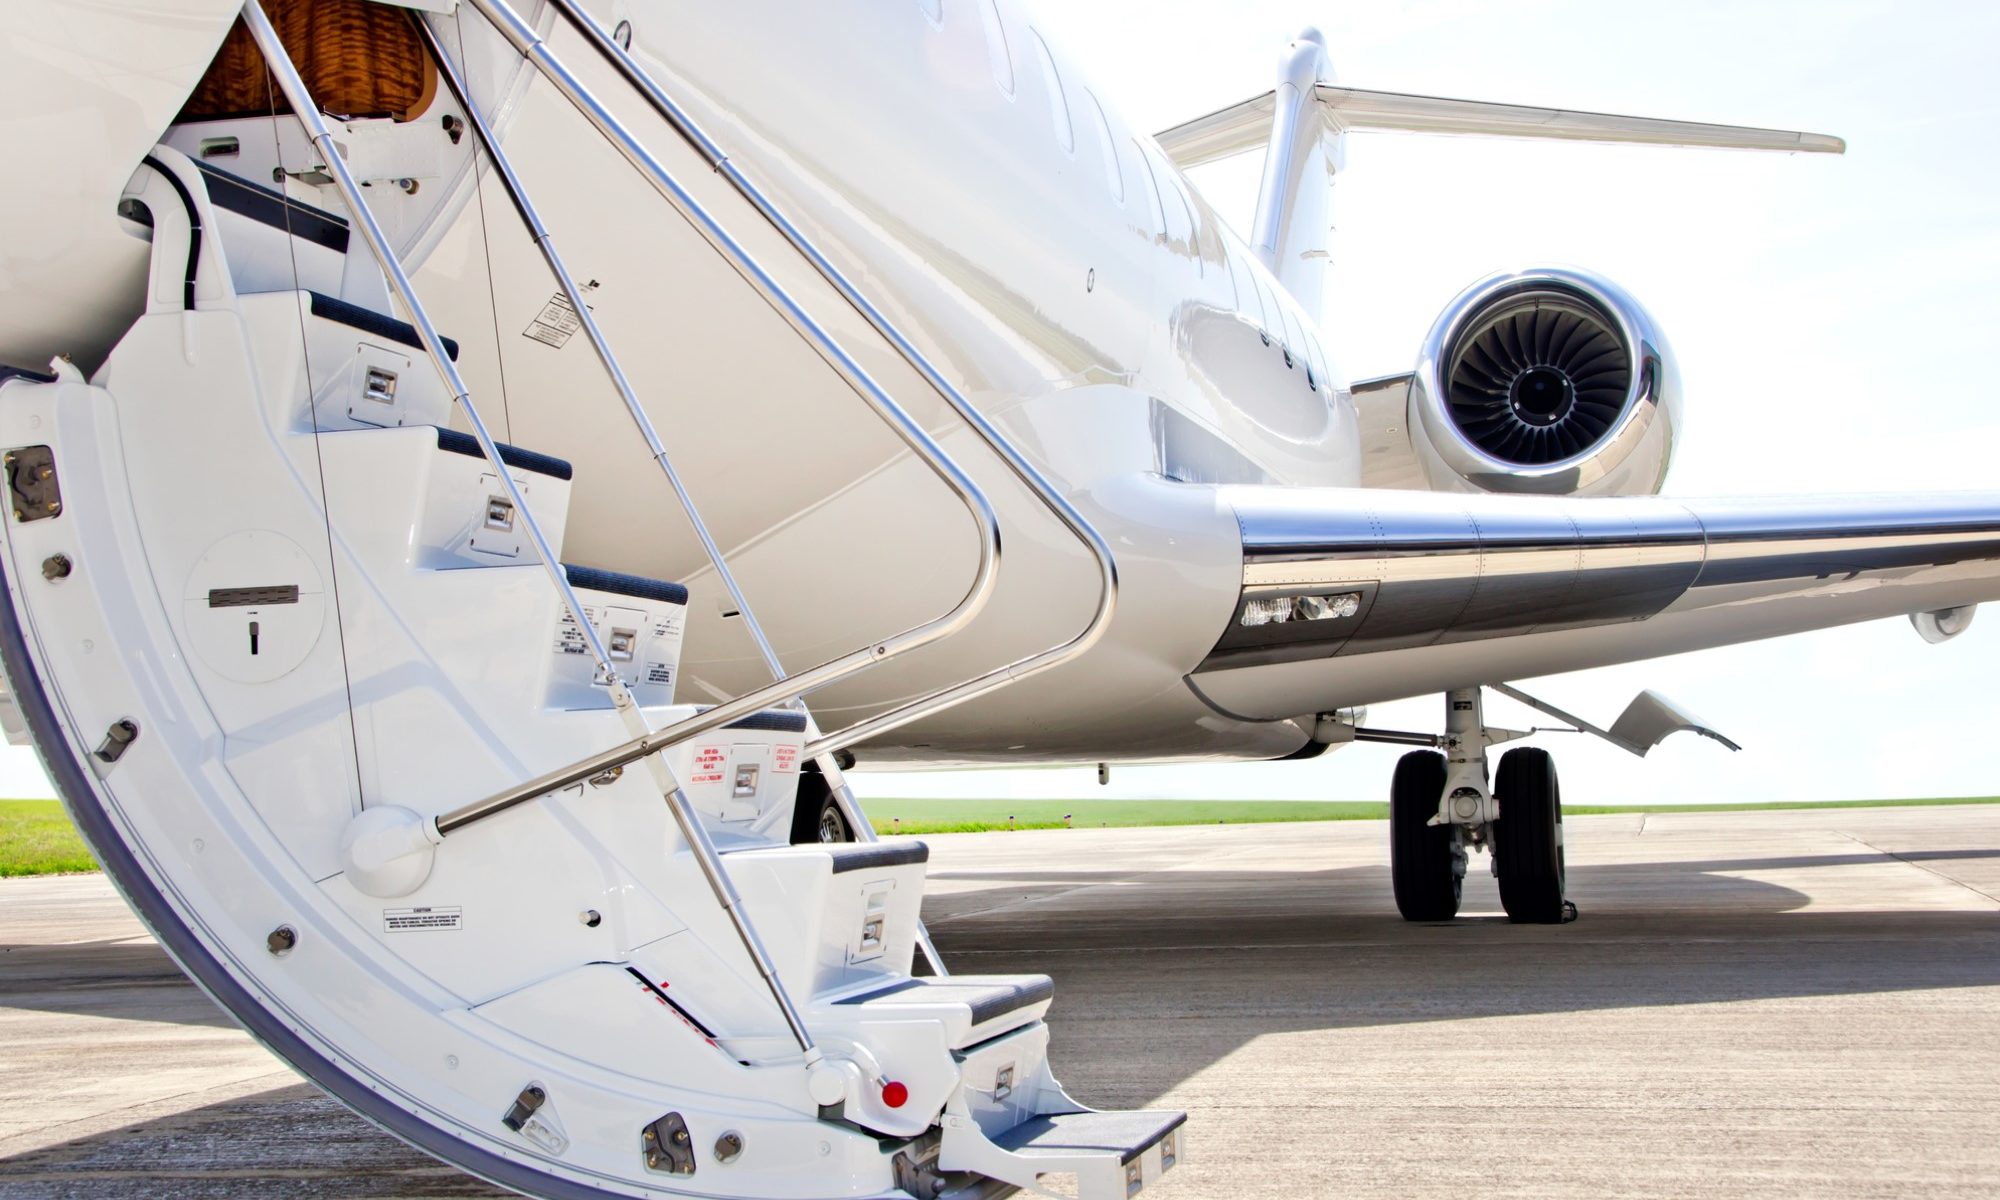 photograph of stairway to private jet